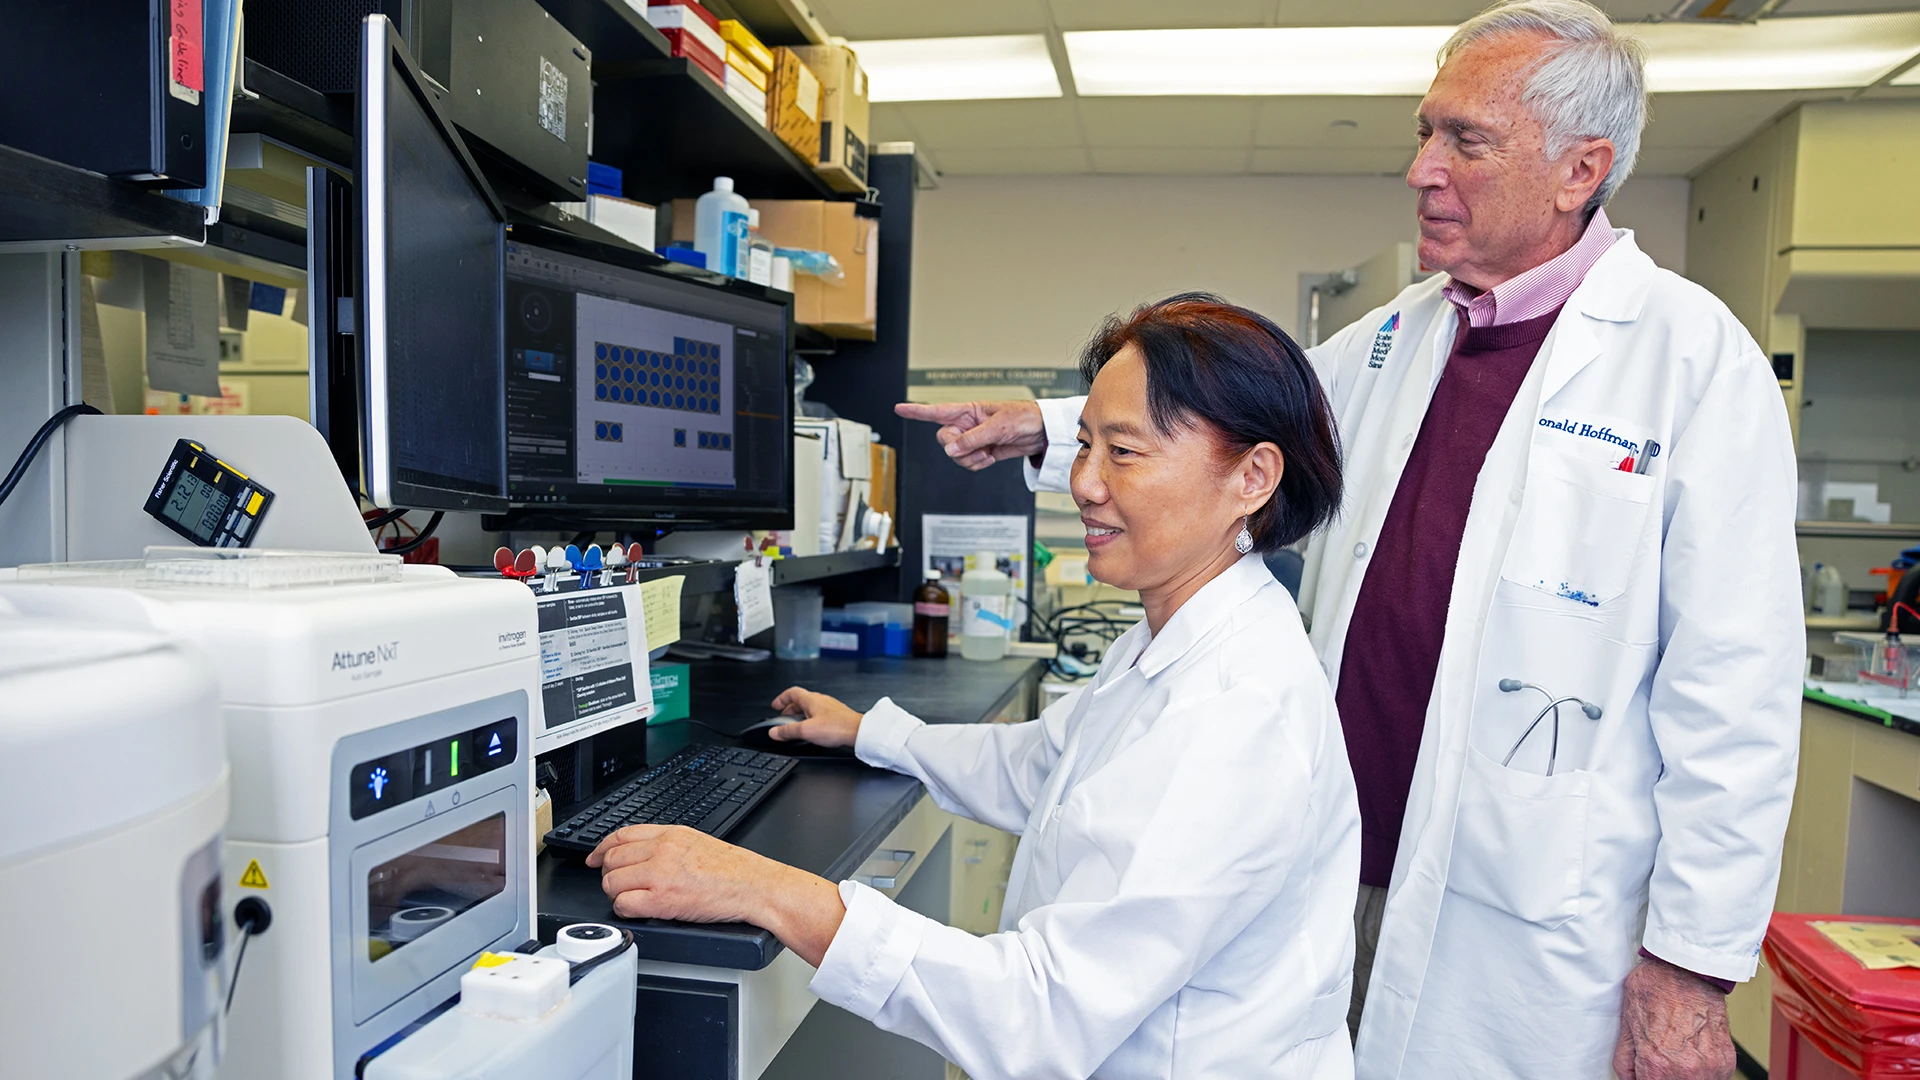 Cell line work in myeloproliferative neoplasms and disorders frequently feature flow cyclometry, seen here as Ronald Hoffman, MD (right) discusses scatter findings with Min Lu, MD, PhD (left). A current line of research involves targeting malignant hematopoietic stem cells in acute myeloid leukemia.